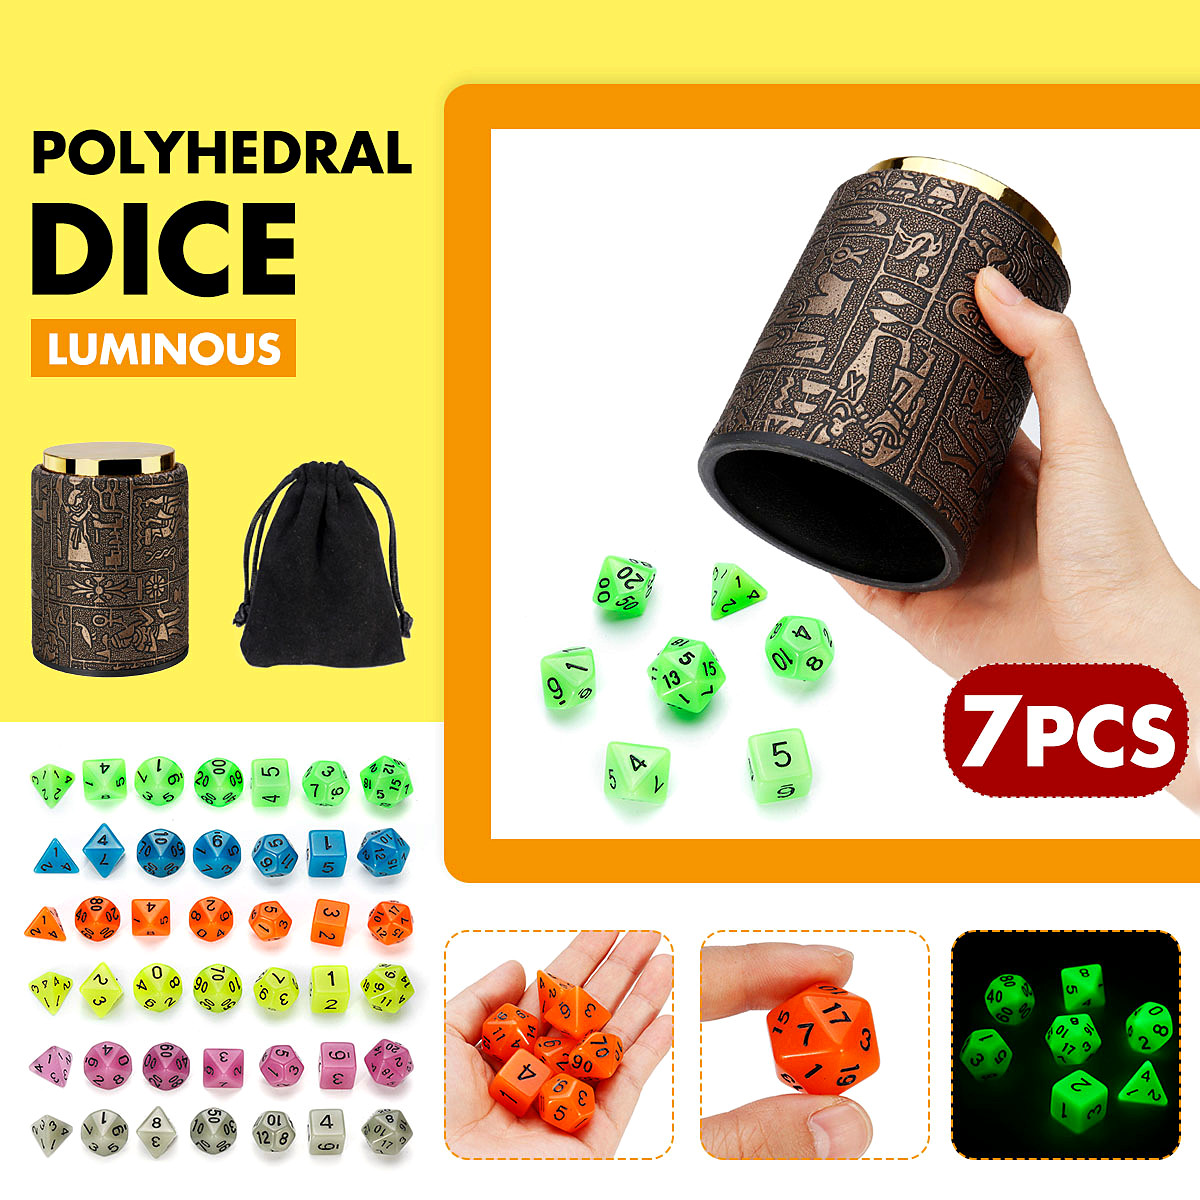 7-Pcs-Luminous-Polyhedral-Dices-Multi-sided-Dice-Set-Polyhedral-Dices-With-Dice-Cup-RPG-Gadget-1422236-1